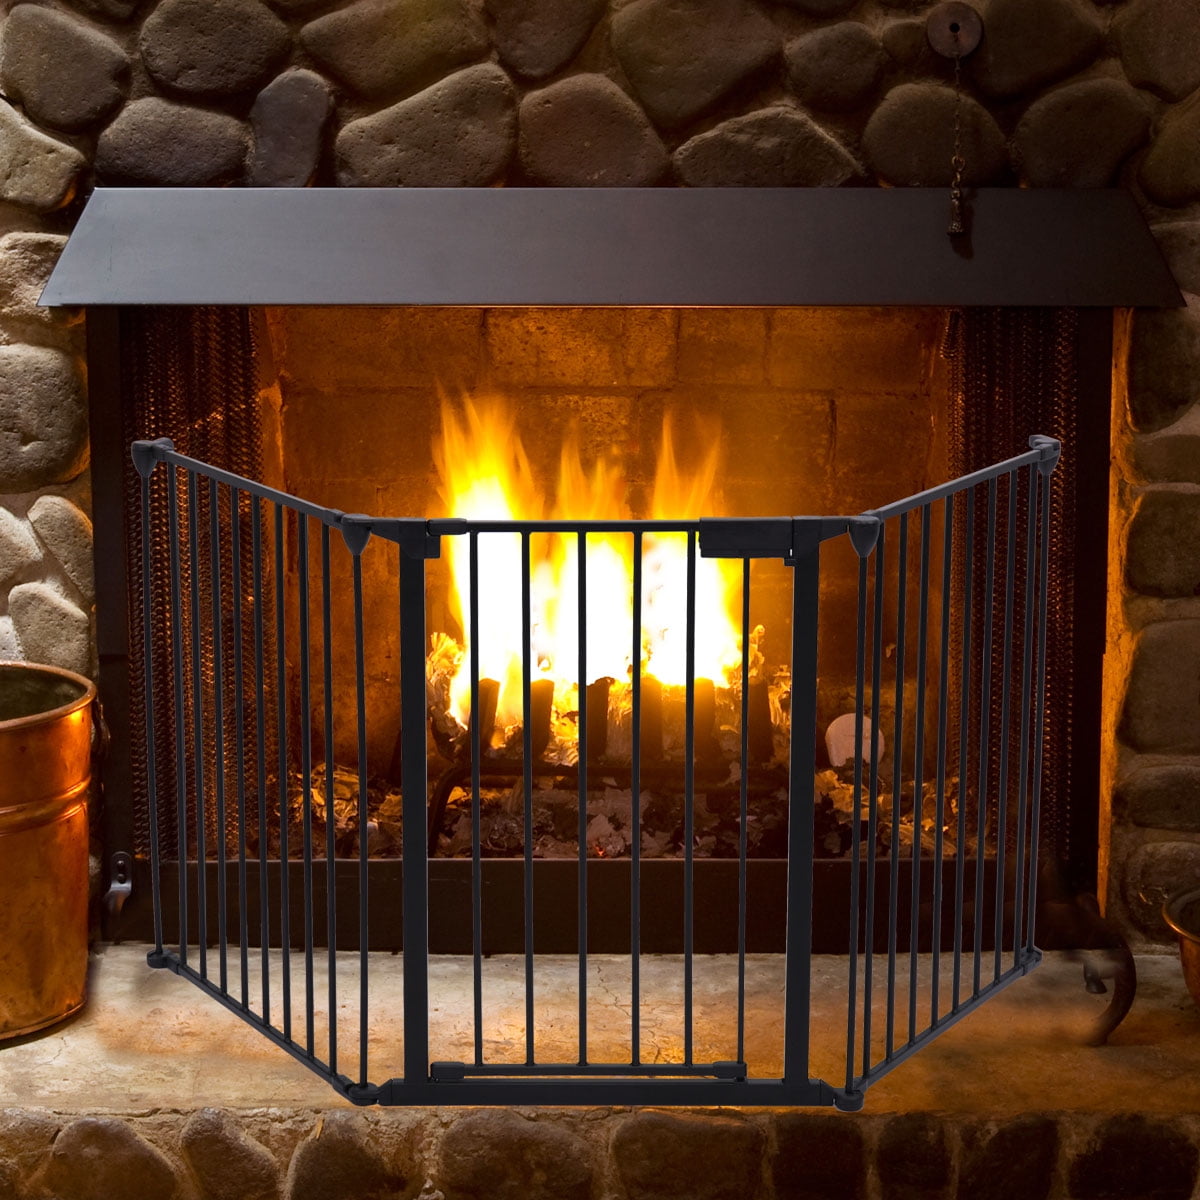 baby proofing fireplace guards｜TikTok Search